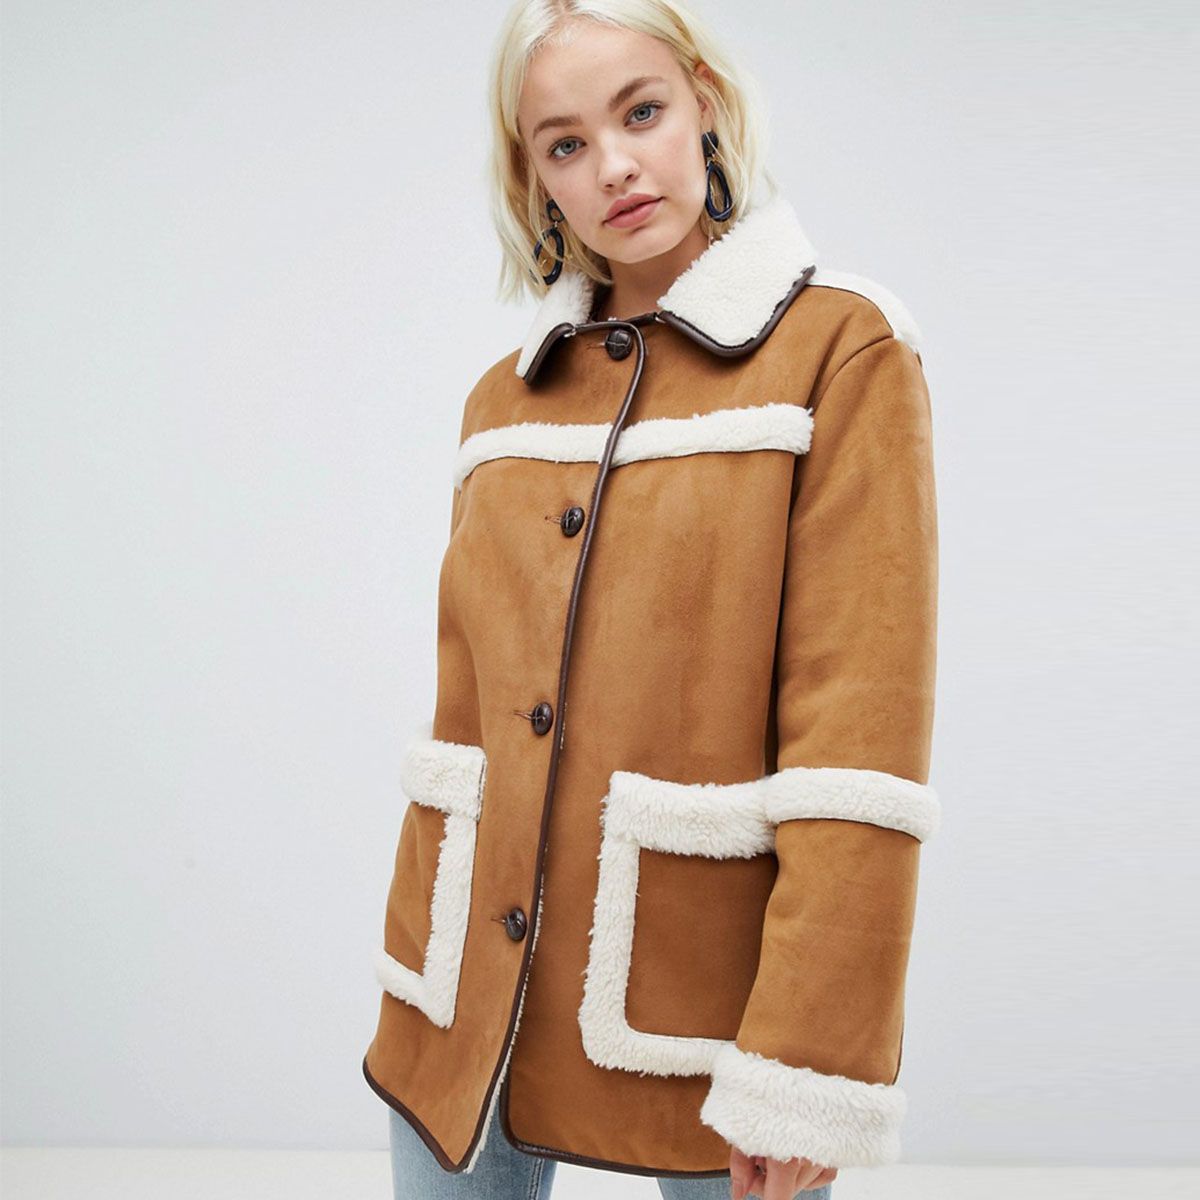 Best ASOS Coats: 21 Great Styles to Last All Winter Long | Who What Wear